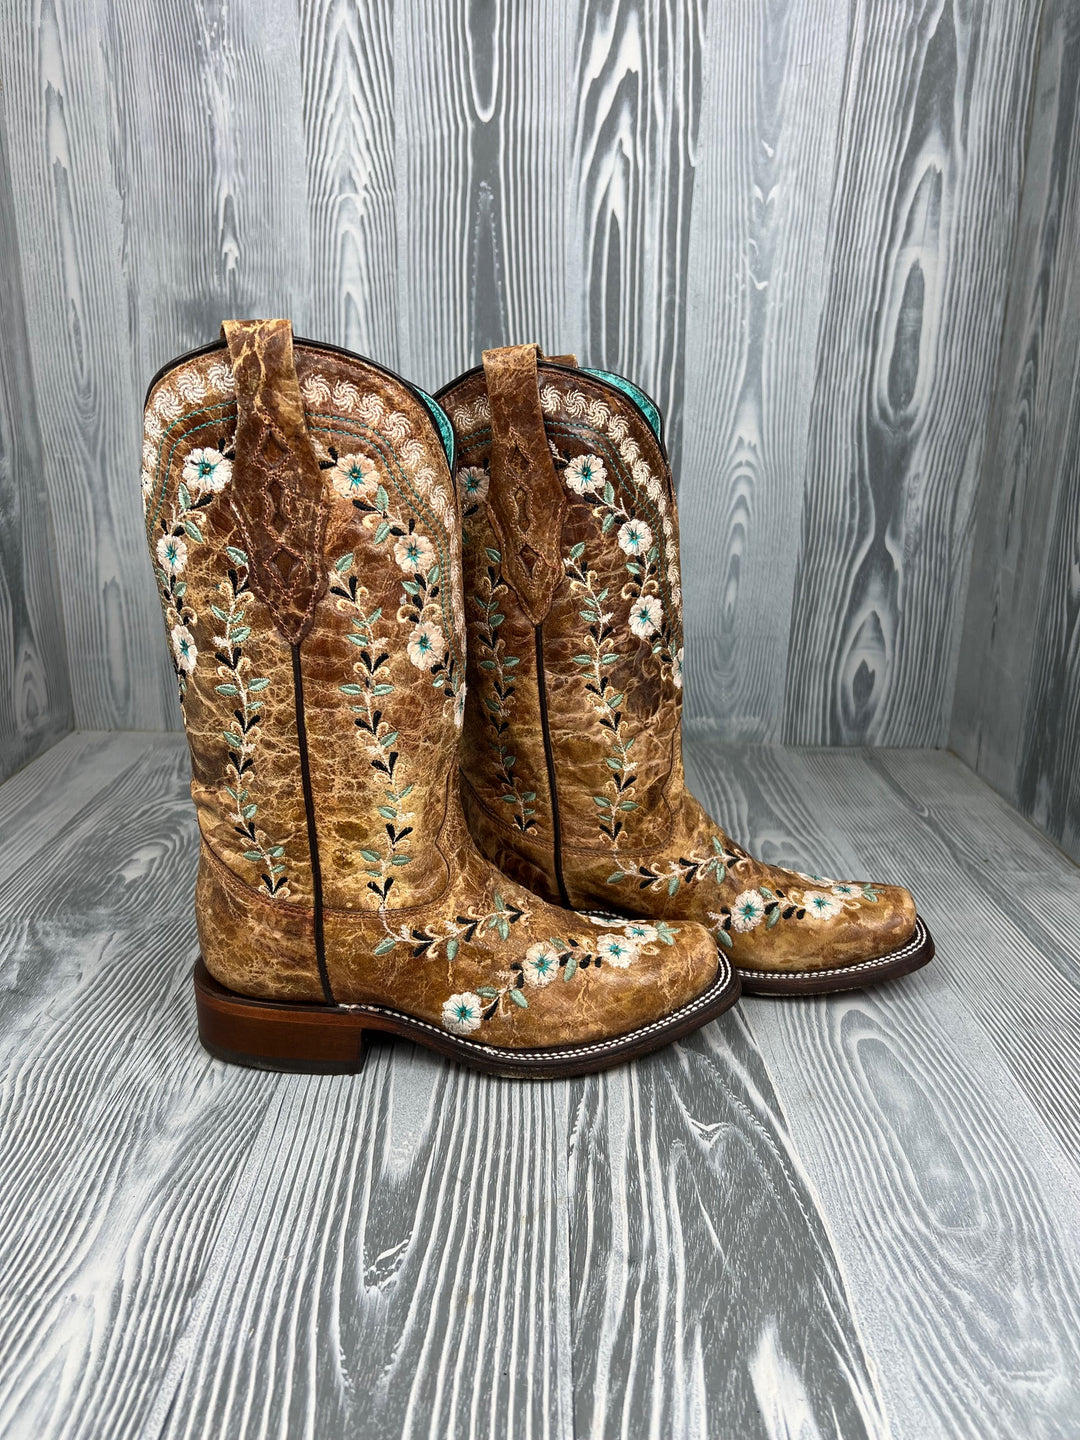 Women's Corral Distressed Cognac Floral Embroidery Western Boot - A4398